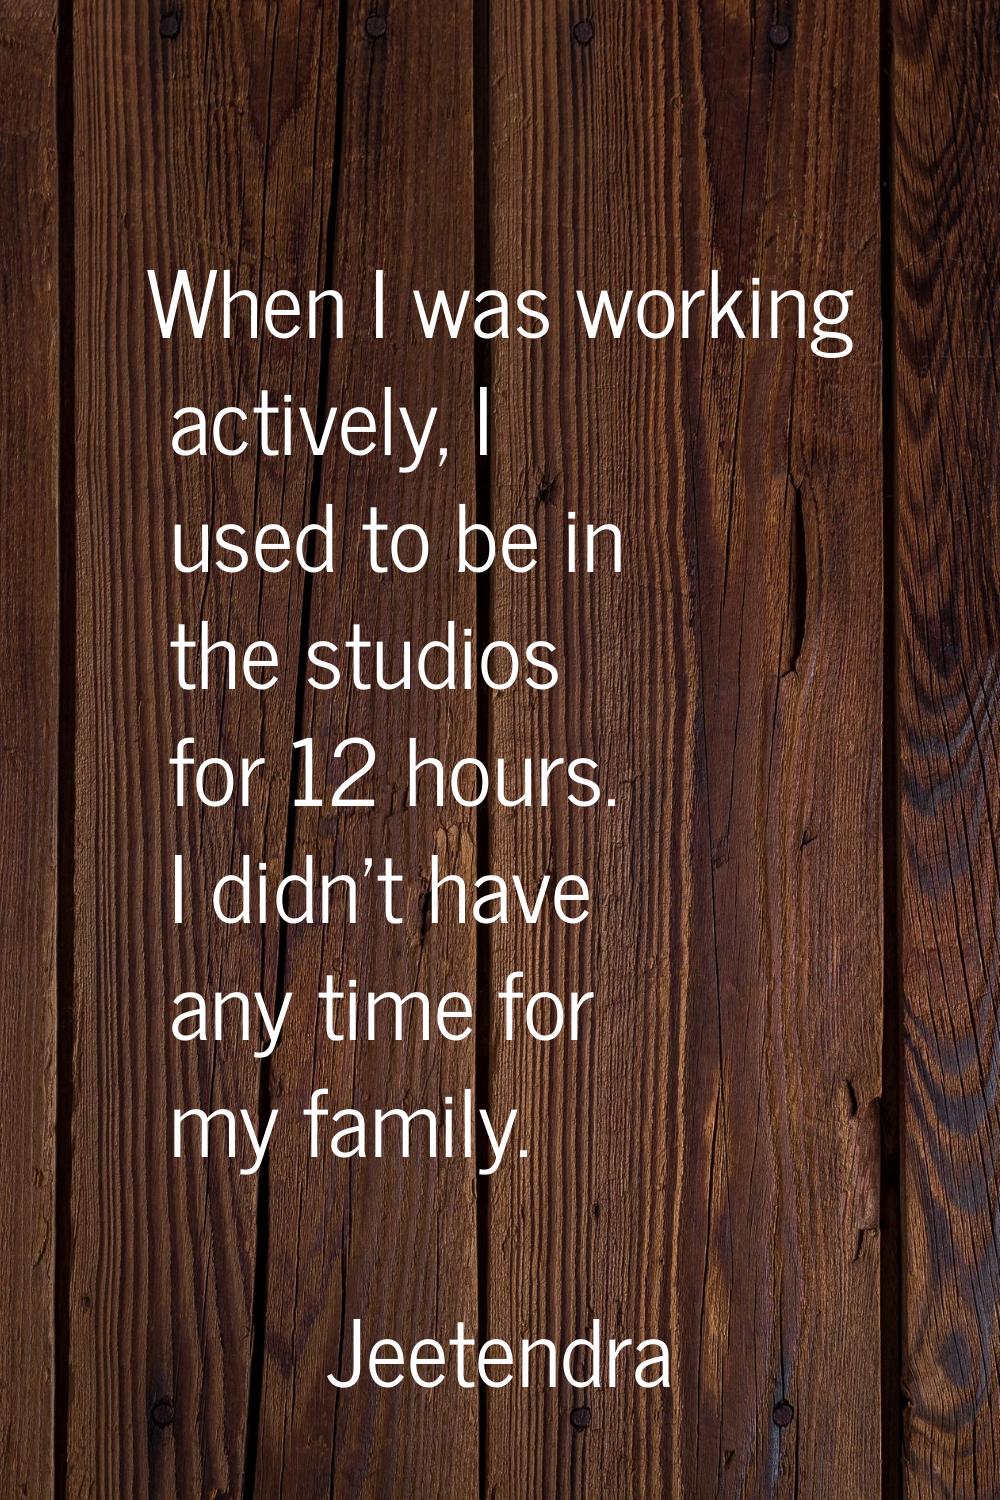 When I was working actively, I used to be in the studios for 12 hours. I didn't have any time for m